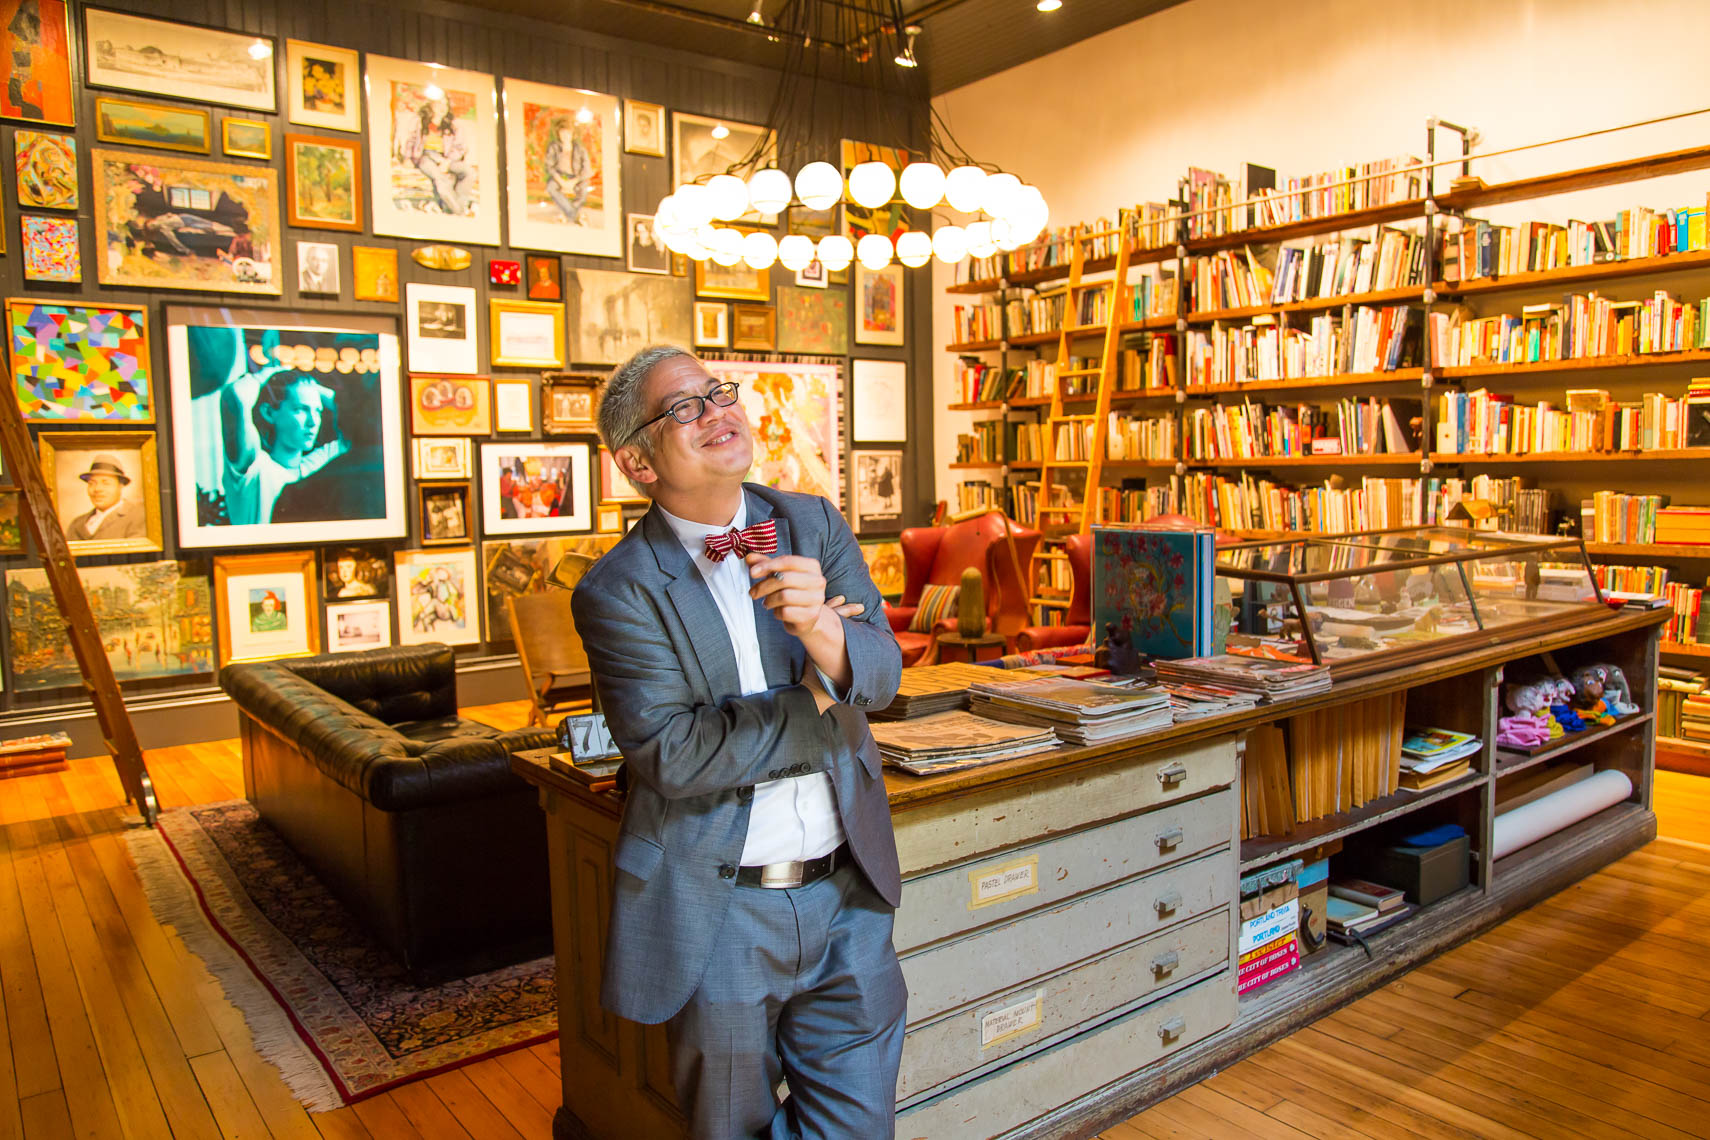 Thomas Lauderdale of the famed band Pink Martini at his home in Portland, Oregon, surrounded by his collections.